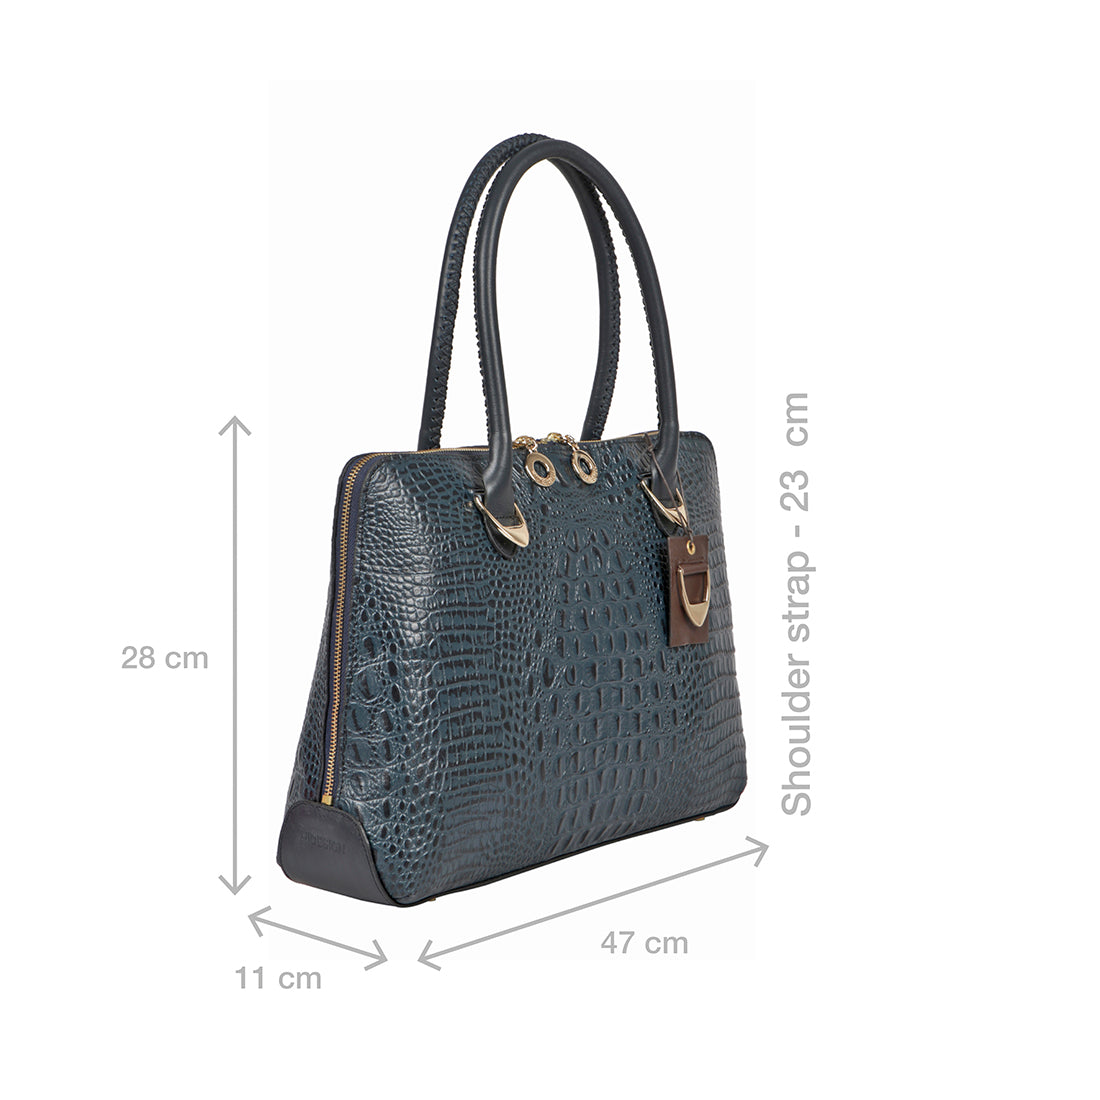 Cotton Material Handbags: Buy Cotton Material Handbags Online at Low Prices  on Snapdeal.com